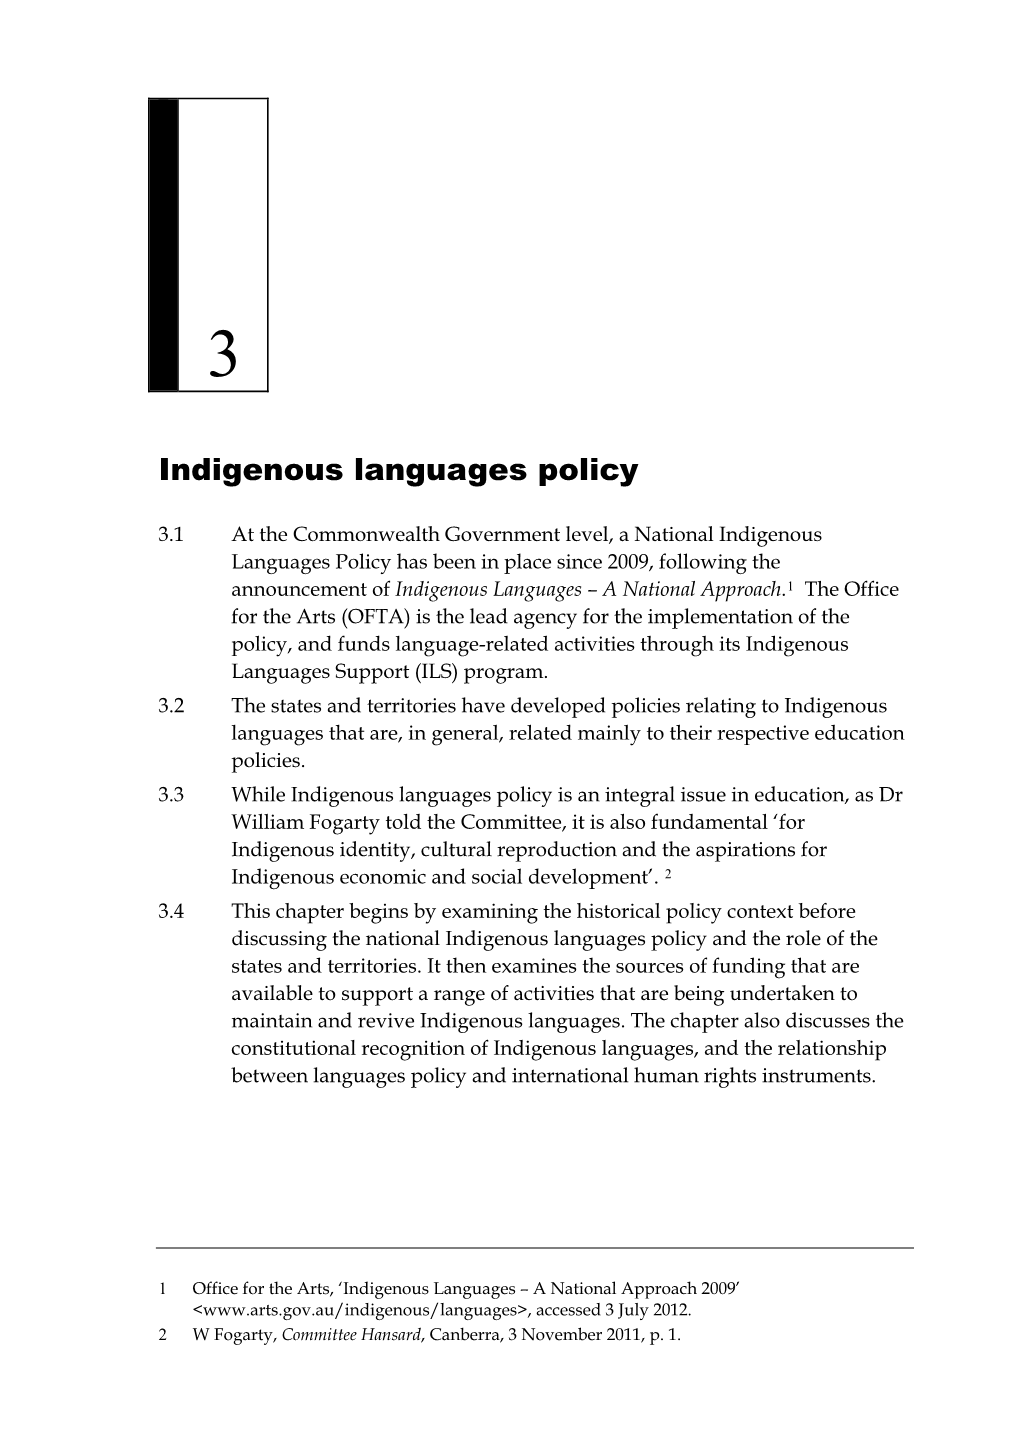 Chapter 2: Indigenous Languages Policy